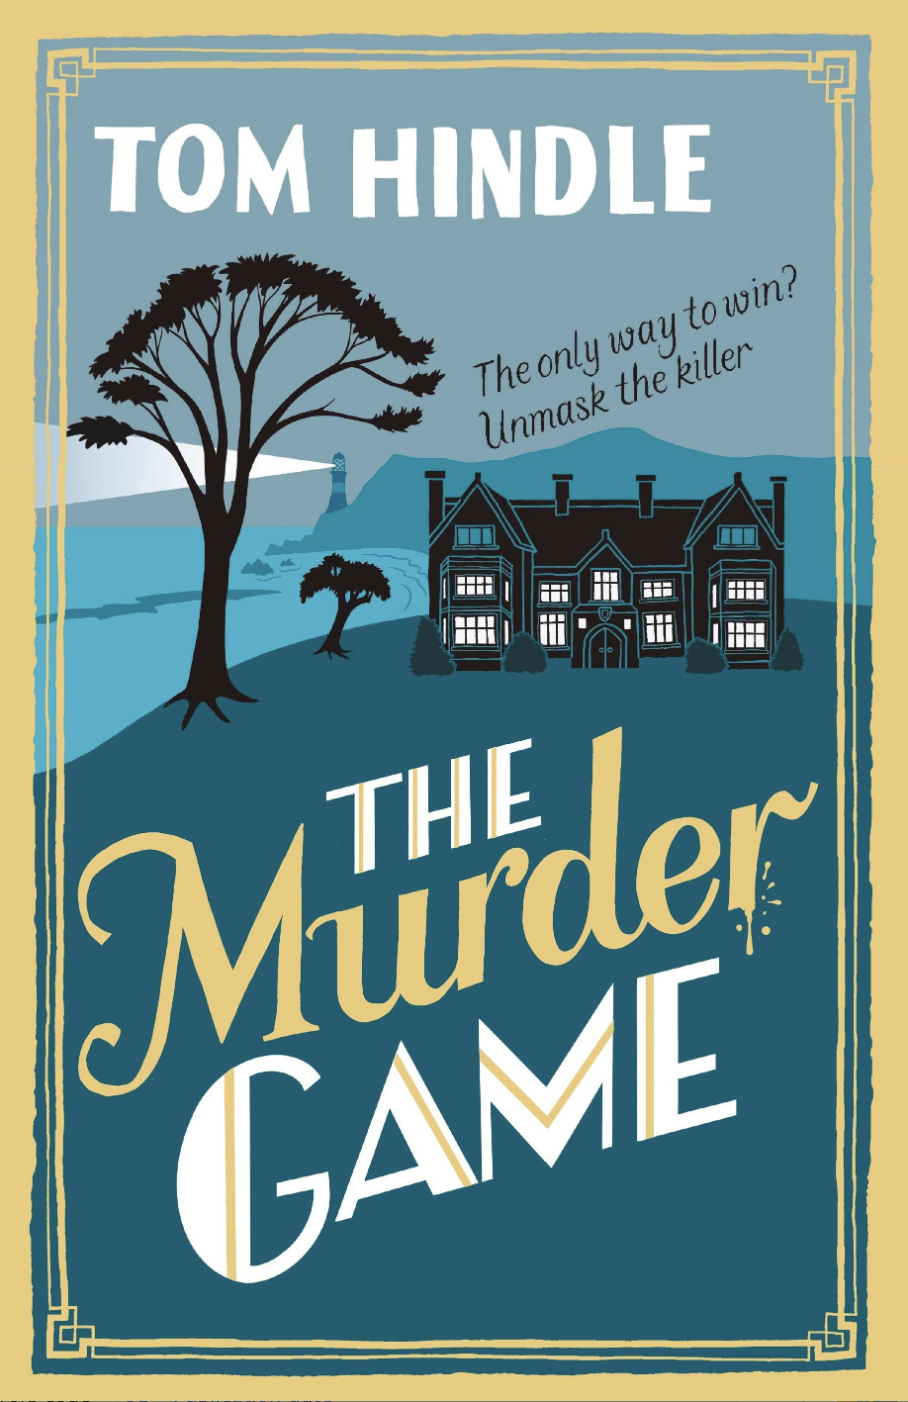 The Murder Game - Tom Hindle